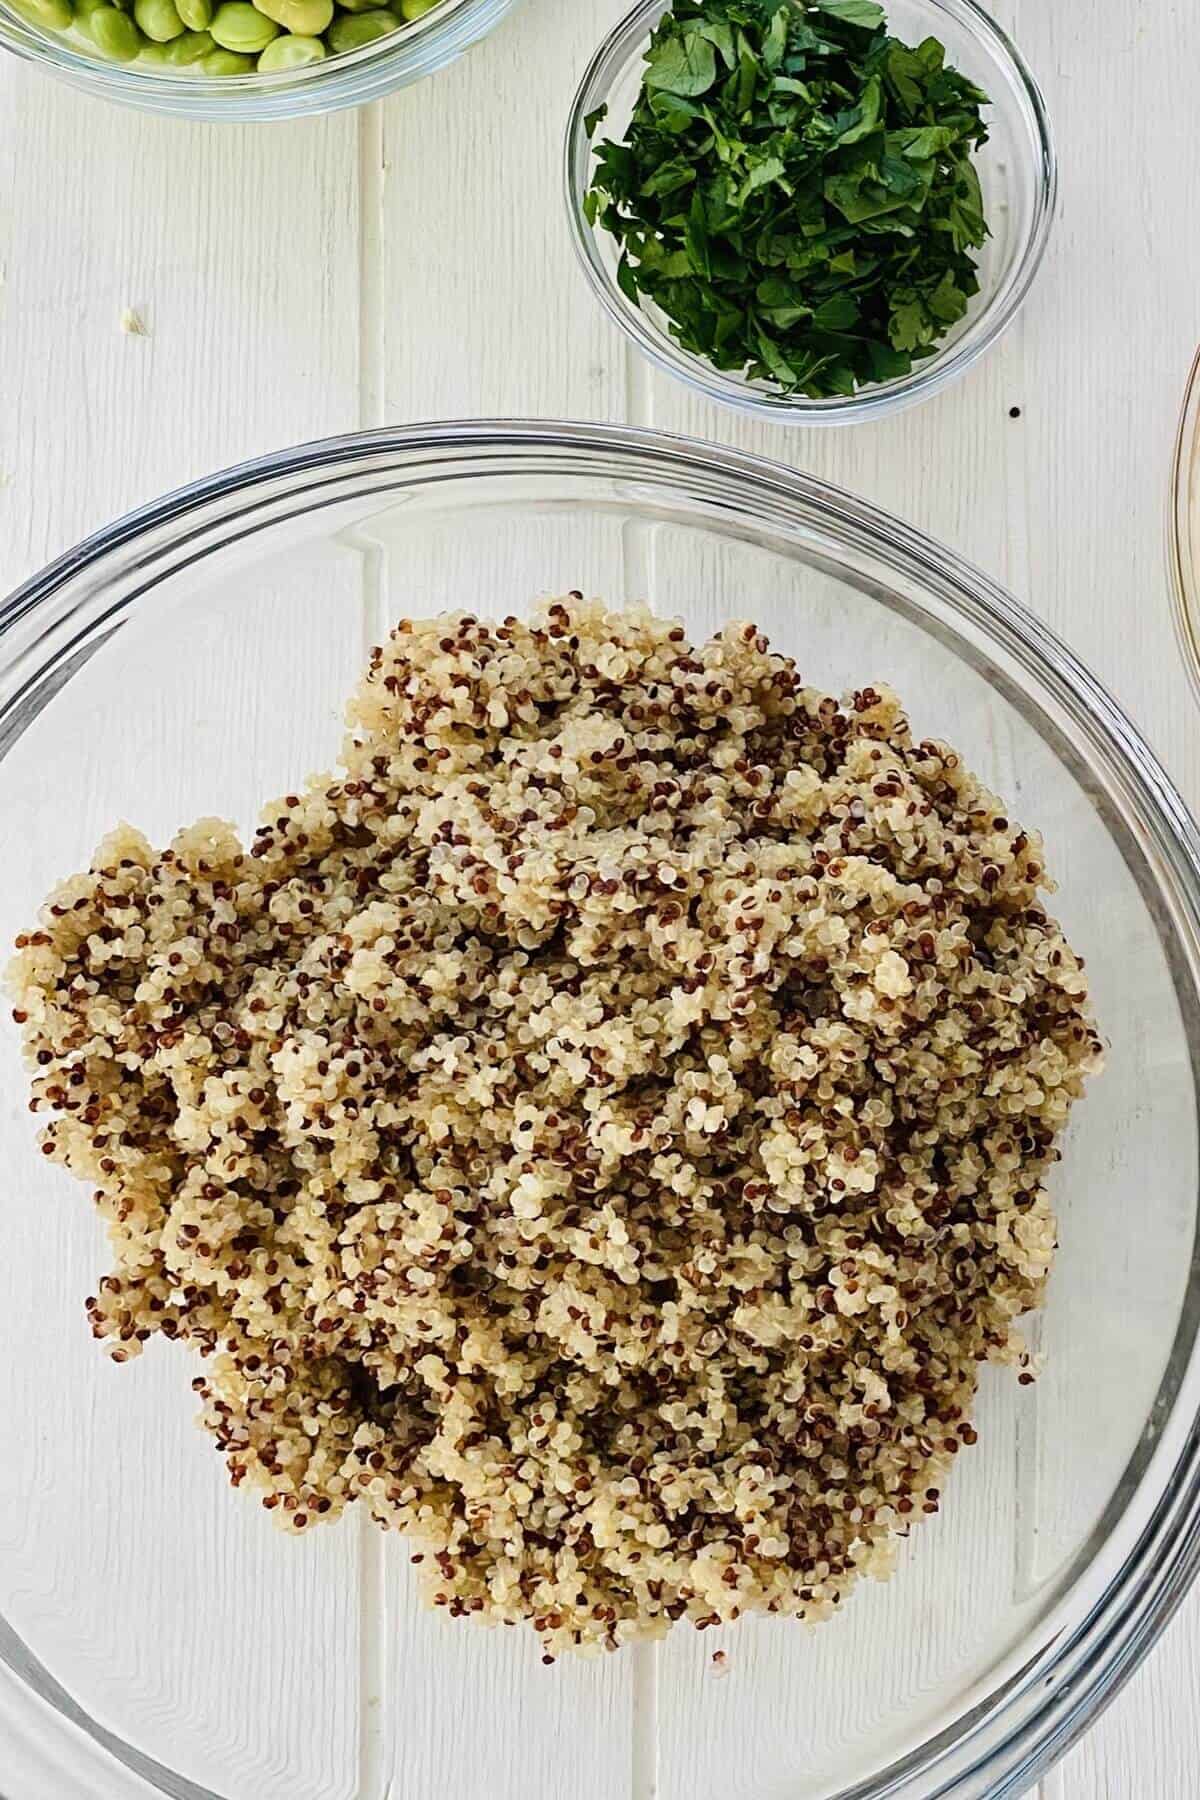 cooked quinoa in a glass bowl.